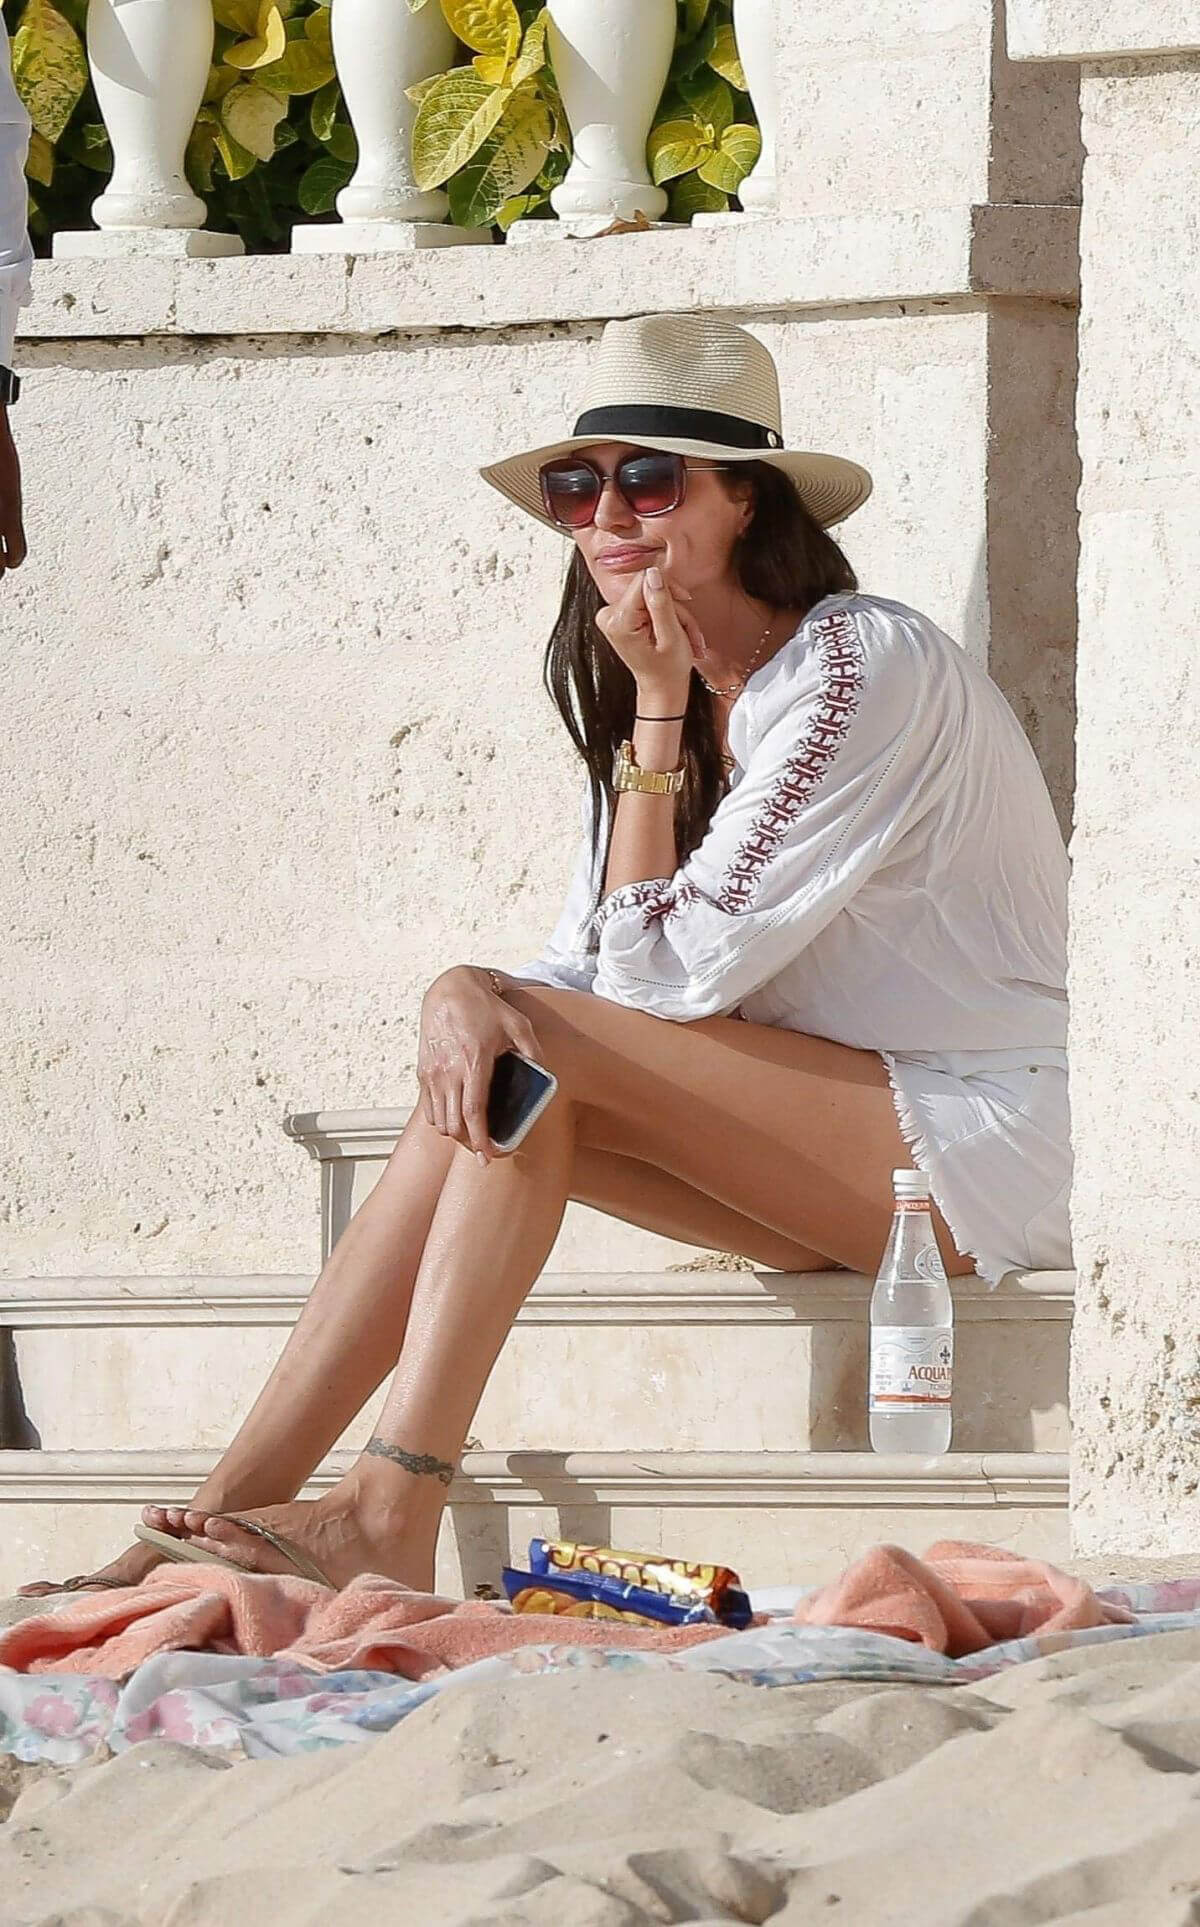 Lauren Silverman on Holiday in Barbados 2018/12/26